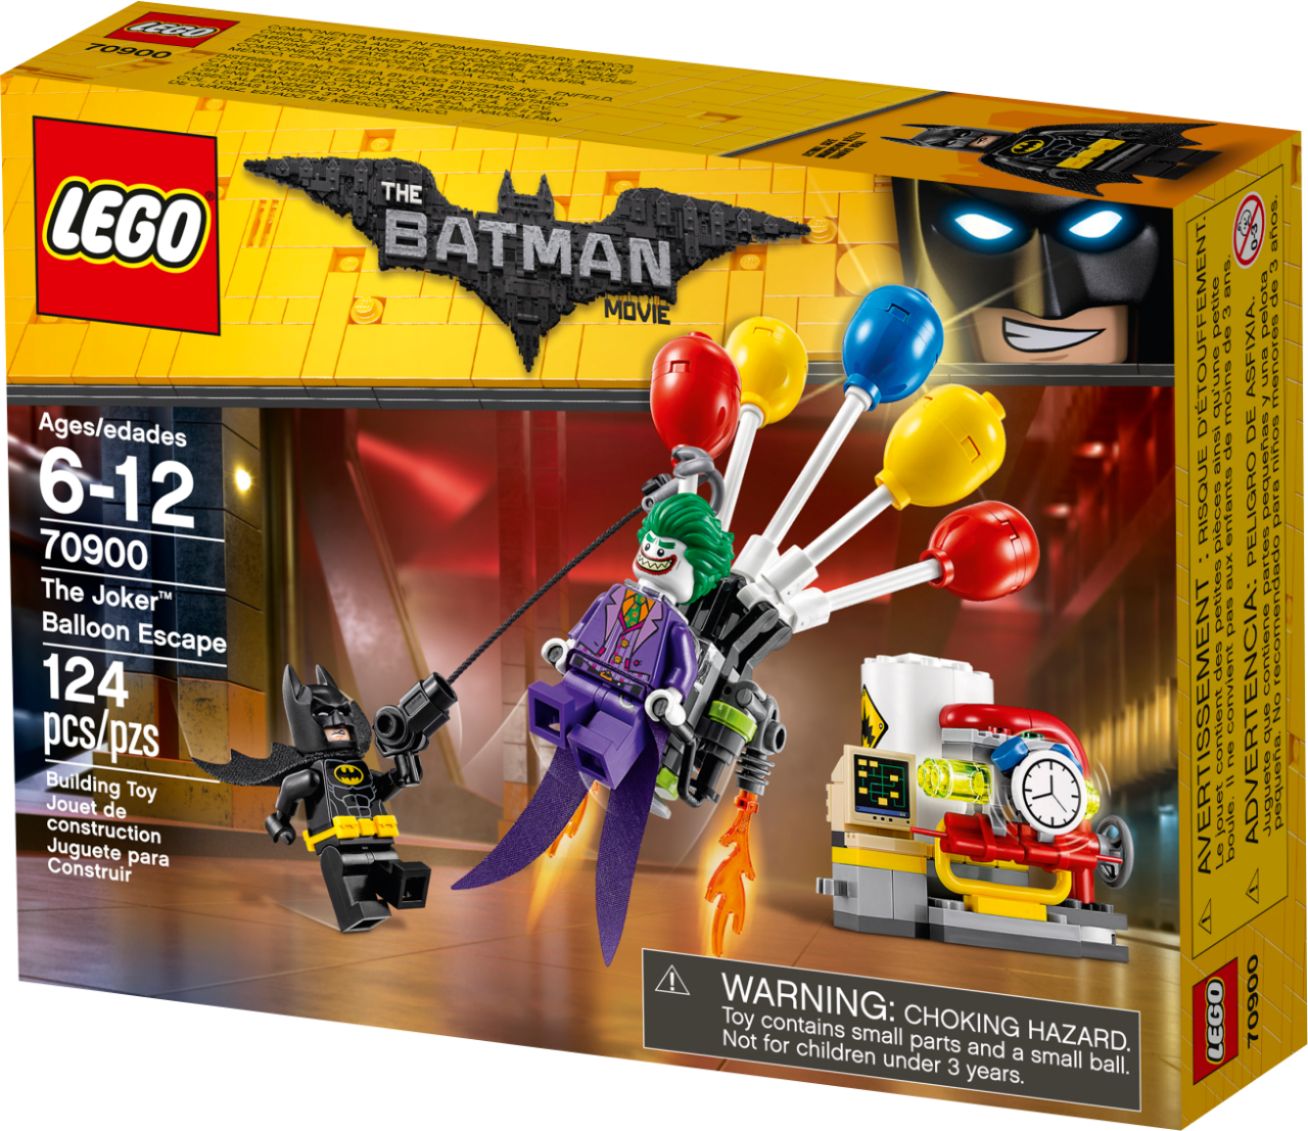 Super Heroes Bundle Pack, The LEGO Batman Movie, Super Pack 2 in 1 (Sets  70900 and 70903) - 673419272209